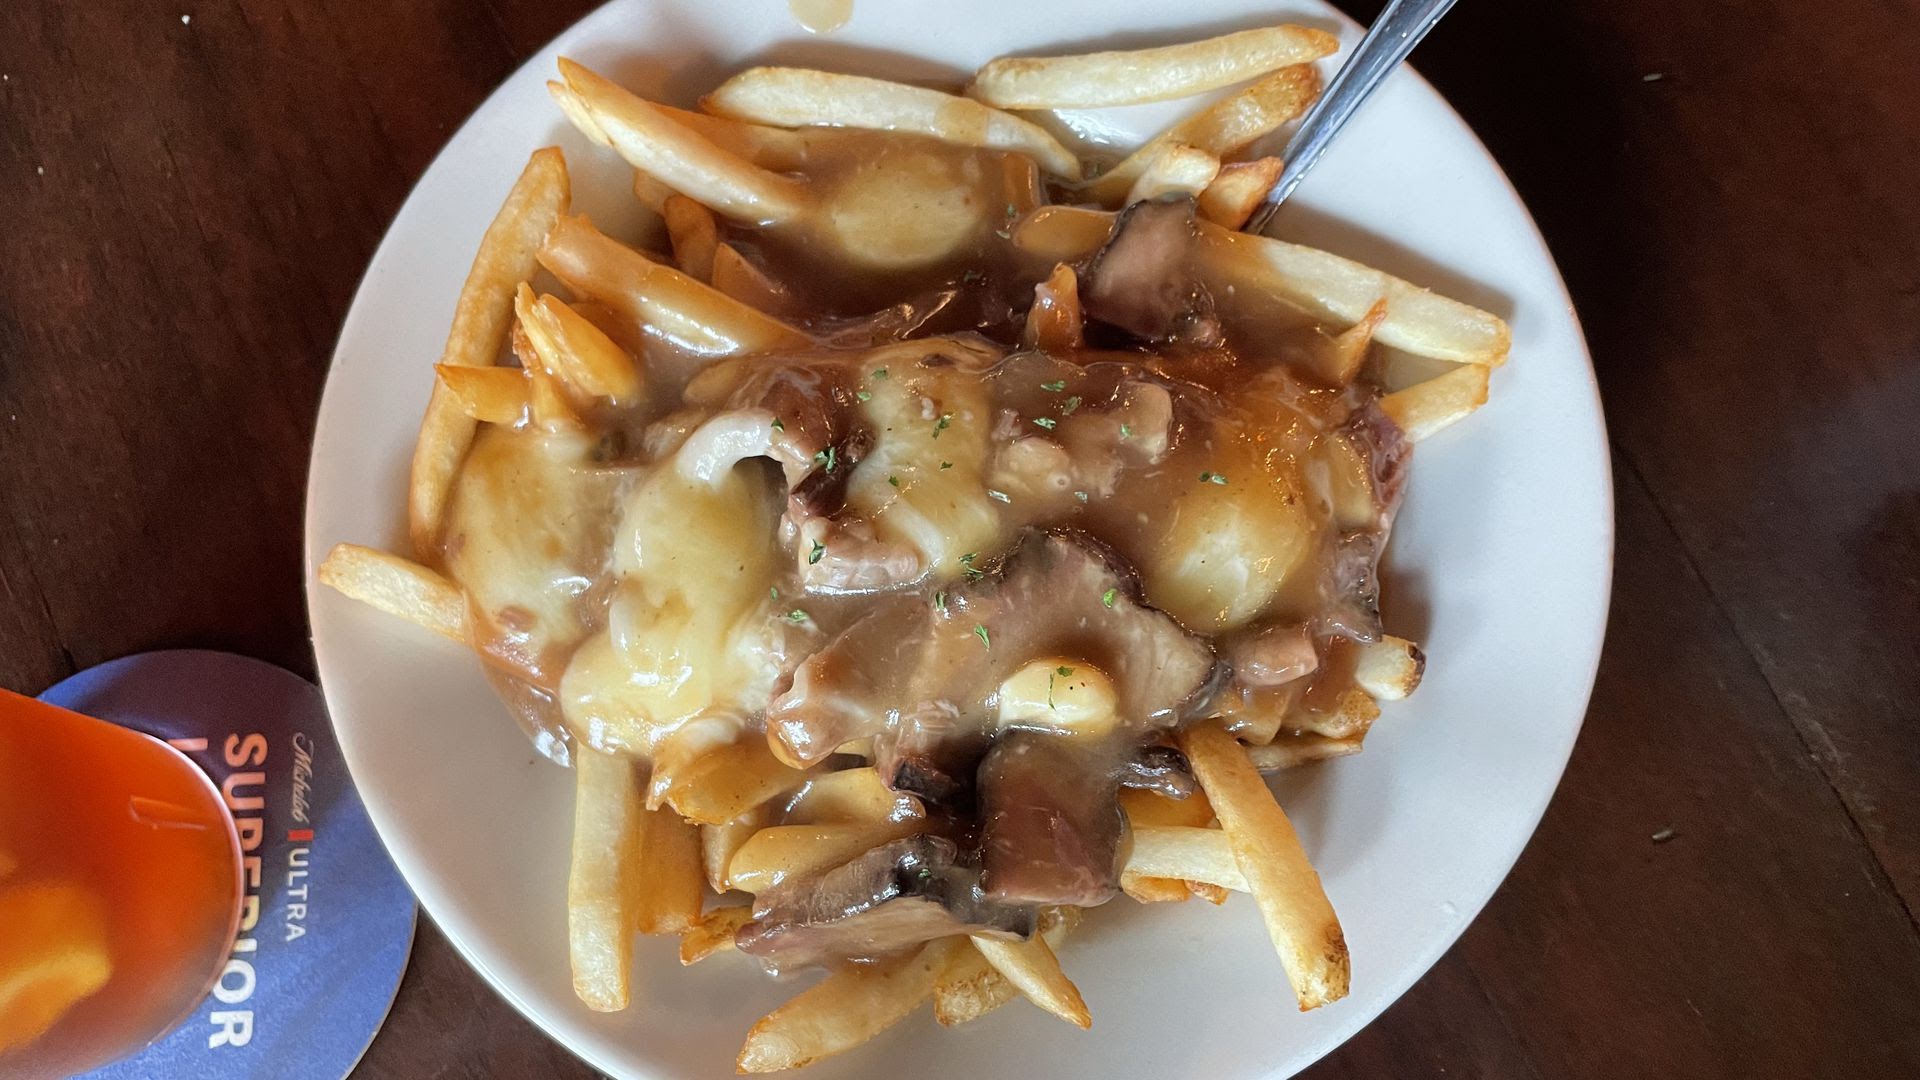 A plate of poutine from Des Moines' Angry Goldfish Pub & Eatery.